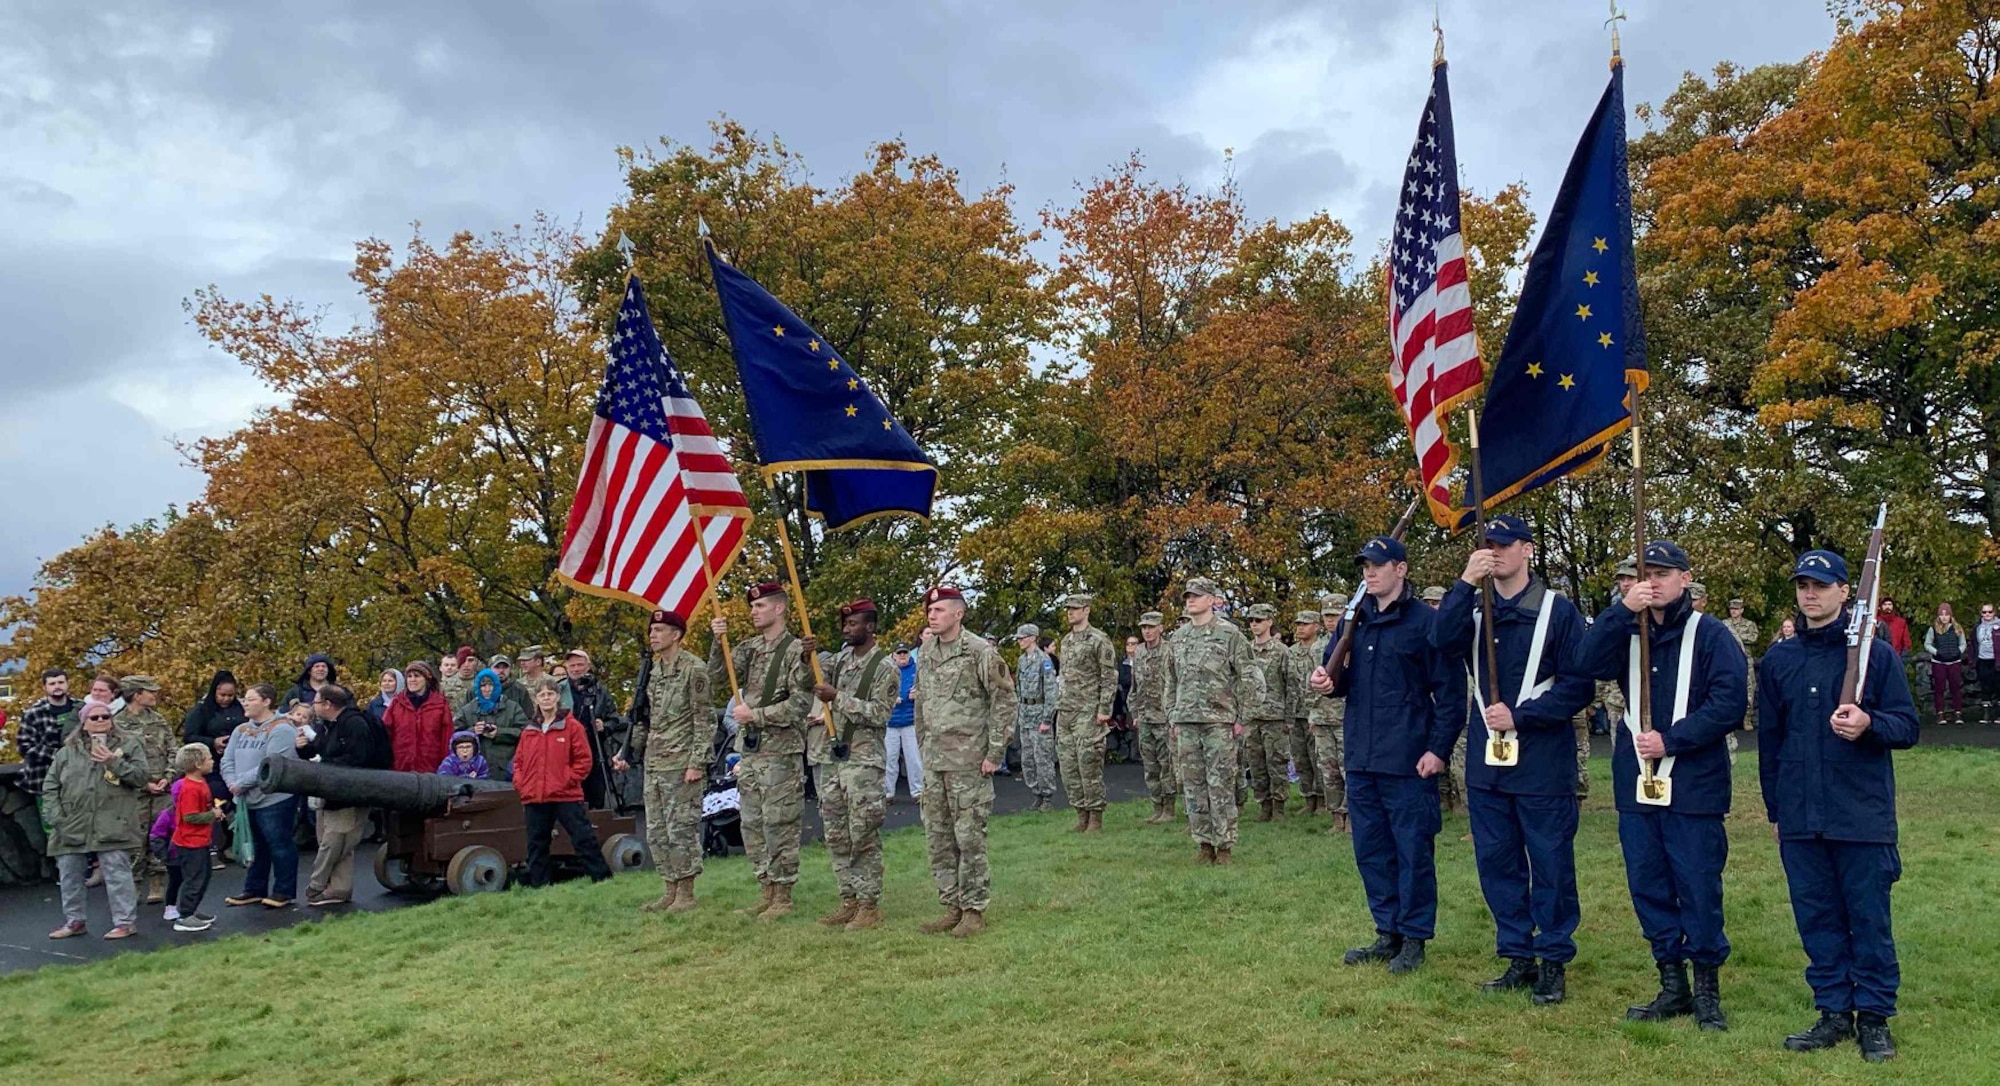 U.S. Army Alaska Soldiers with 725th Brigade Support Battalion, 4th Brigade Combat Team (Airborne), 25th Infantry Division, and the 9th Army Band participate in the 2017 Alaska Day Festival in Sitka, Alaska, Oct. 18. The past and present merged on Oct. 18 as service members participated and reenactors recreated the historical 1867 transfer of the Territory of Alaska from Russia to the United States at Castle Hill in Sitka. The Transfer Ceremony 1867 Commemoration is the main event of the annual Alaska Day Festival, which has been held in the city and Borough of Sitka for 70 years. The USARAK Soldiers continued the legacy of the U.S. Army’s 9th Infantry Regiment troops who participated in the 1867 ceremony. (U.S. Army photo by Derrick Crawford)